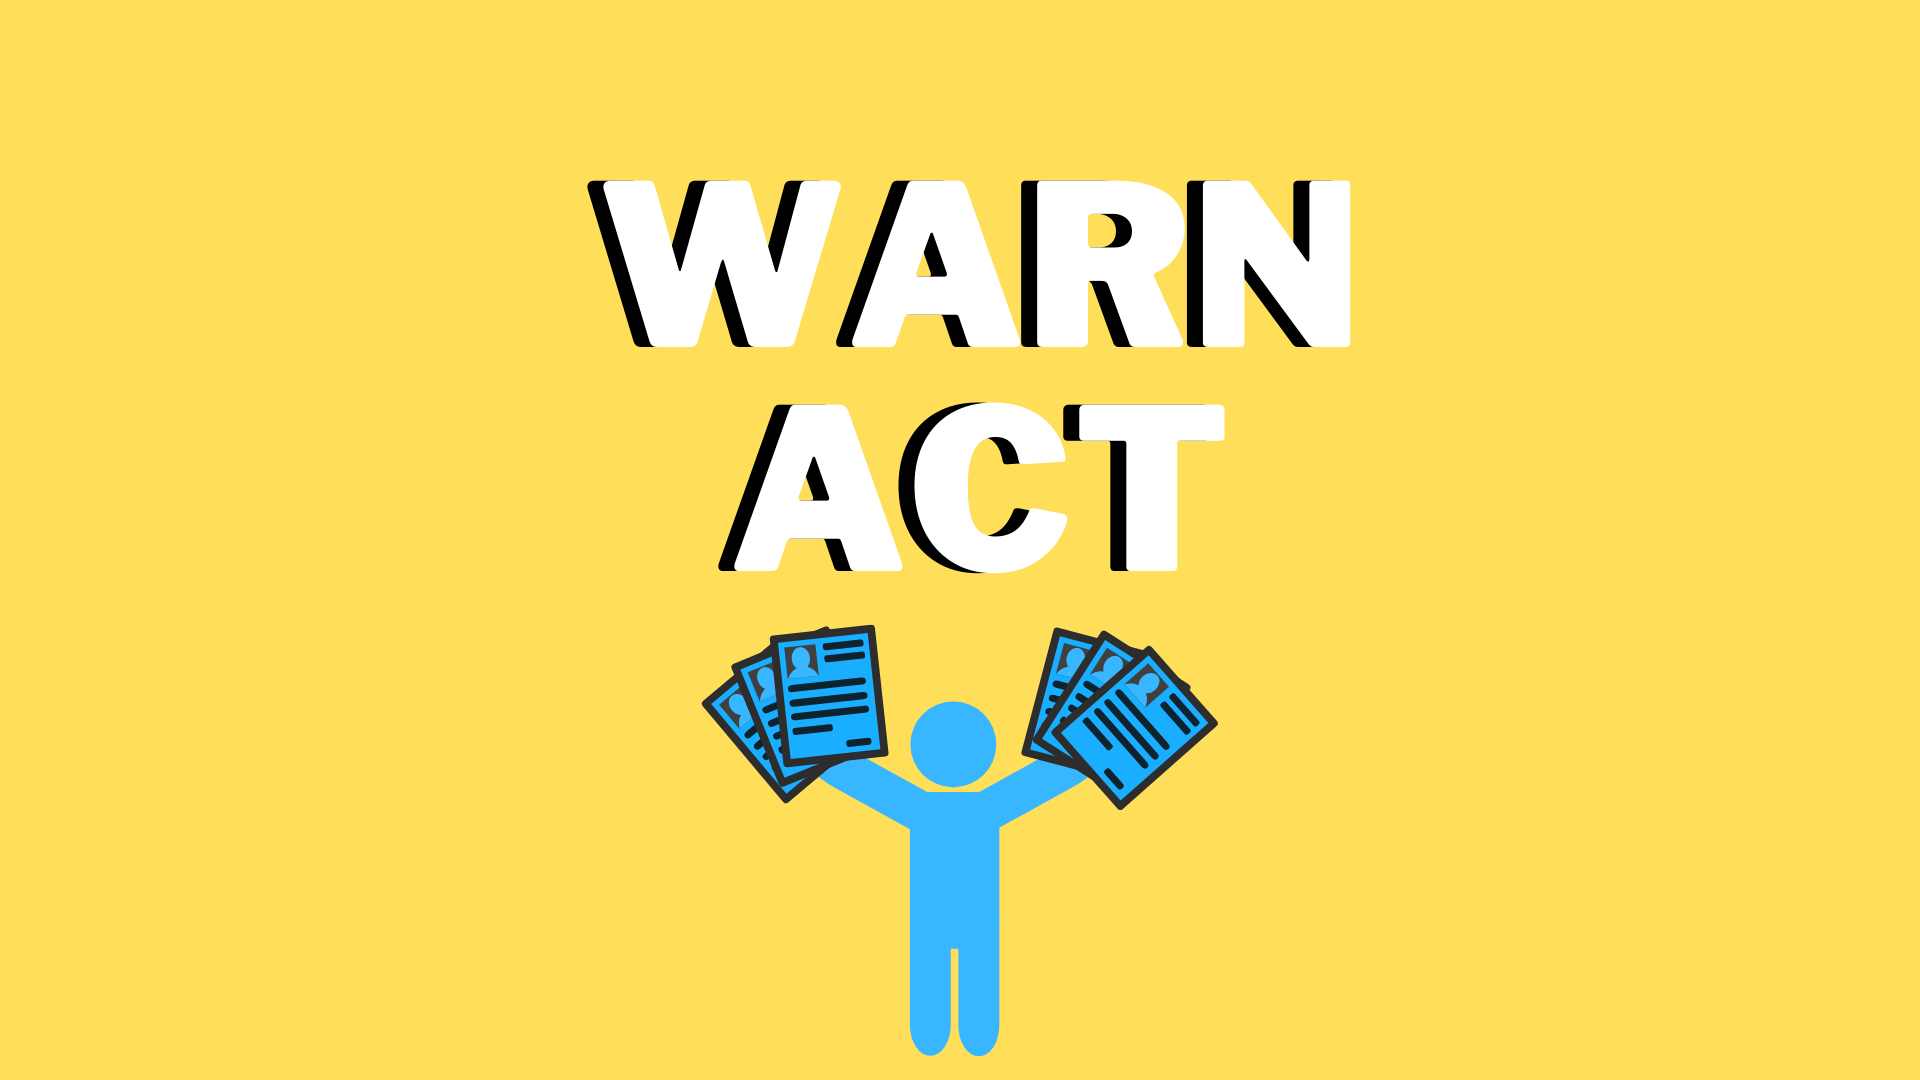 Everything You Need To Know About WARN Act